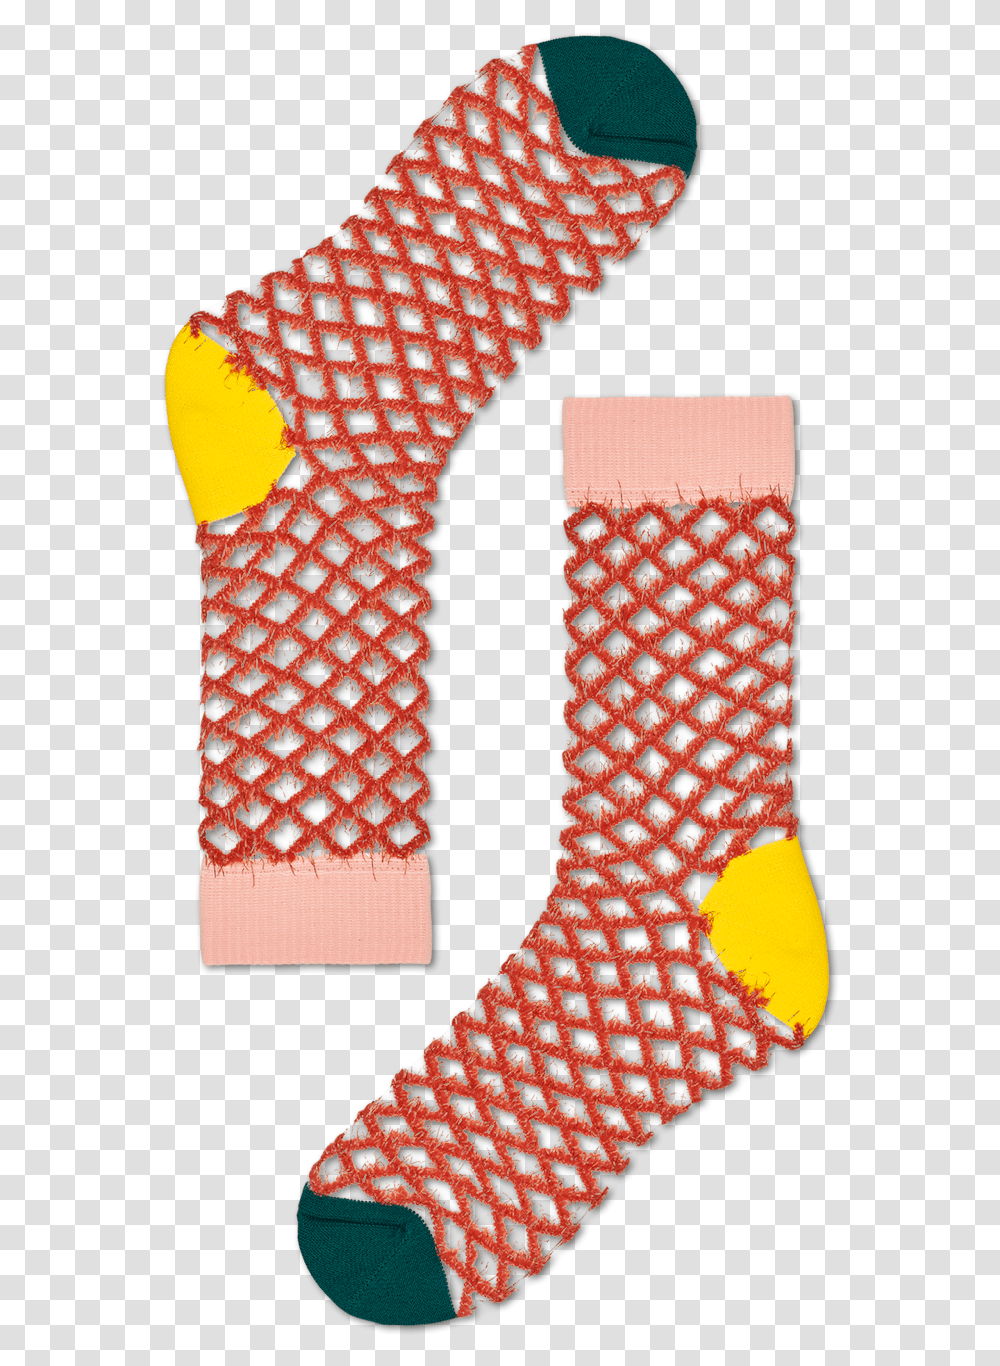 Product Image, Stocking, Tie, Accessories, Accessory Transparent Png